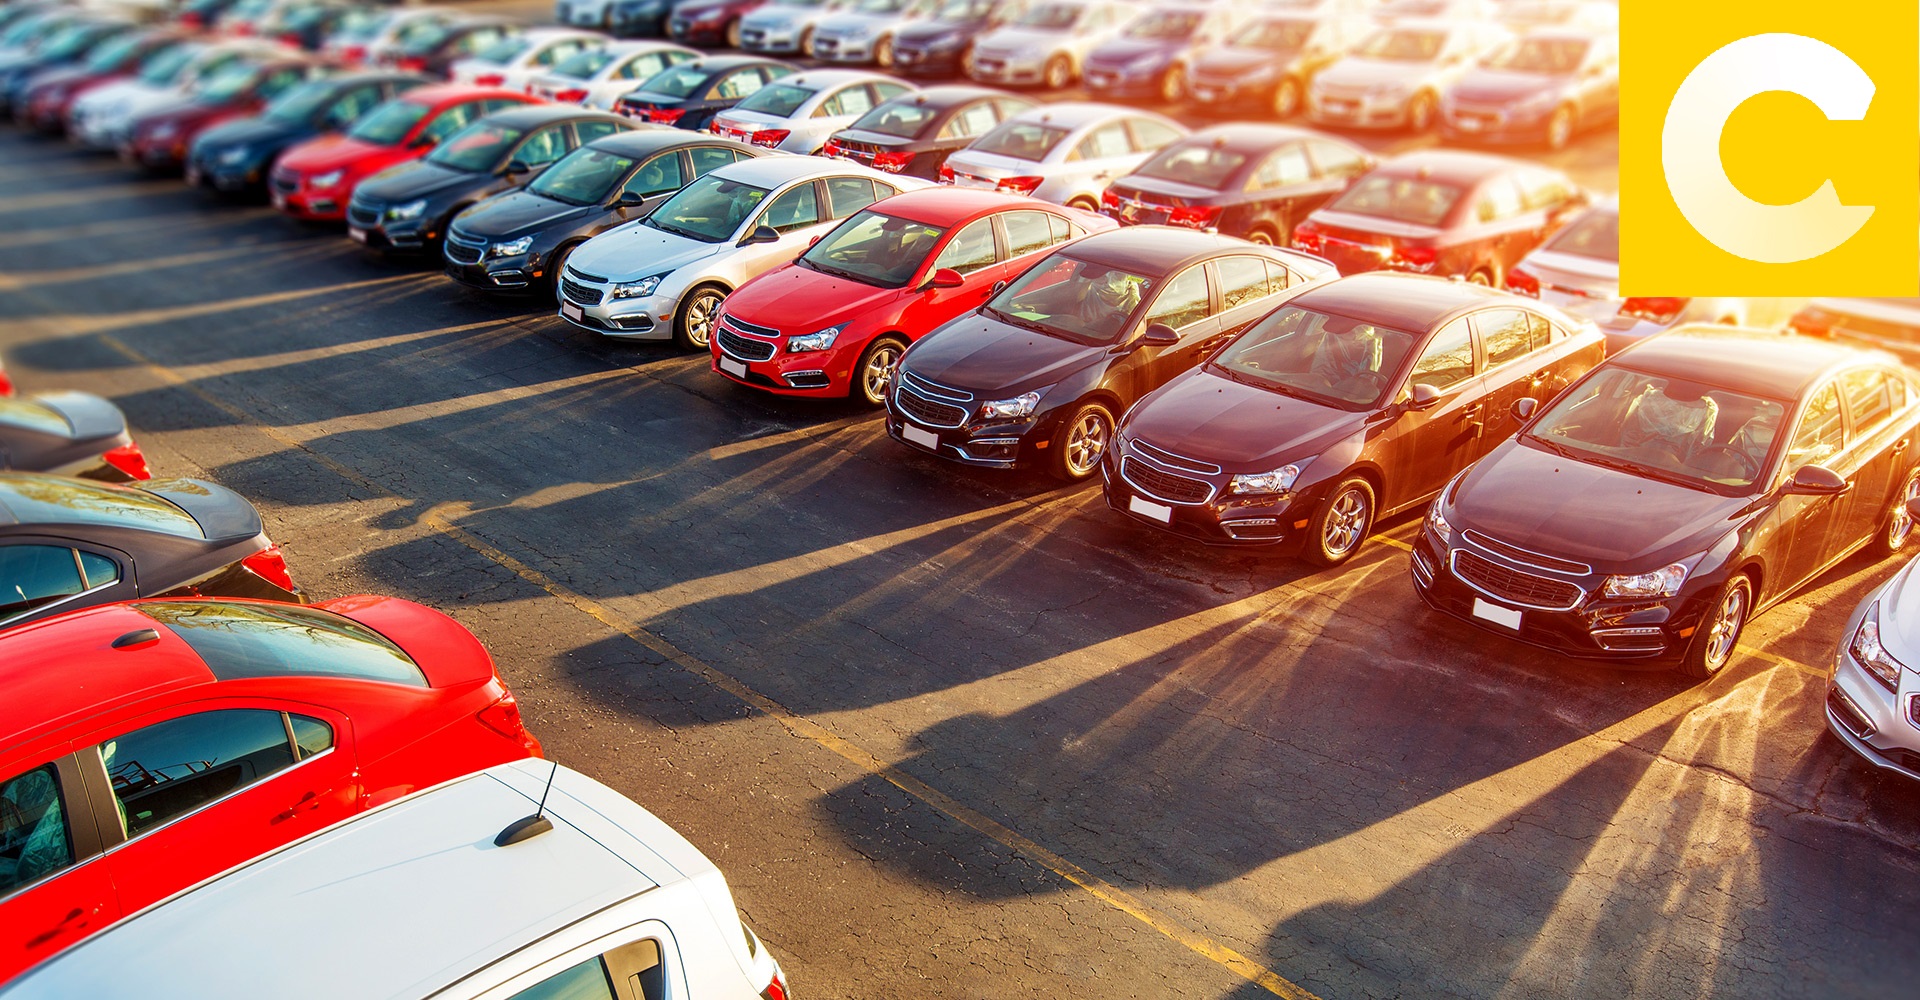 Why Car Yards Are Trustworthy Sources For Pre-Owned Vehicles